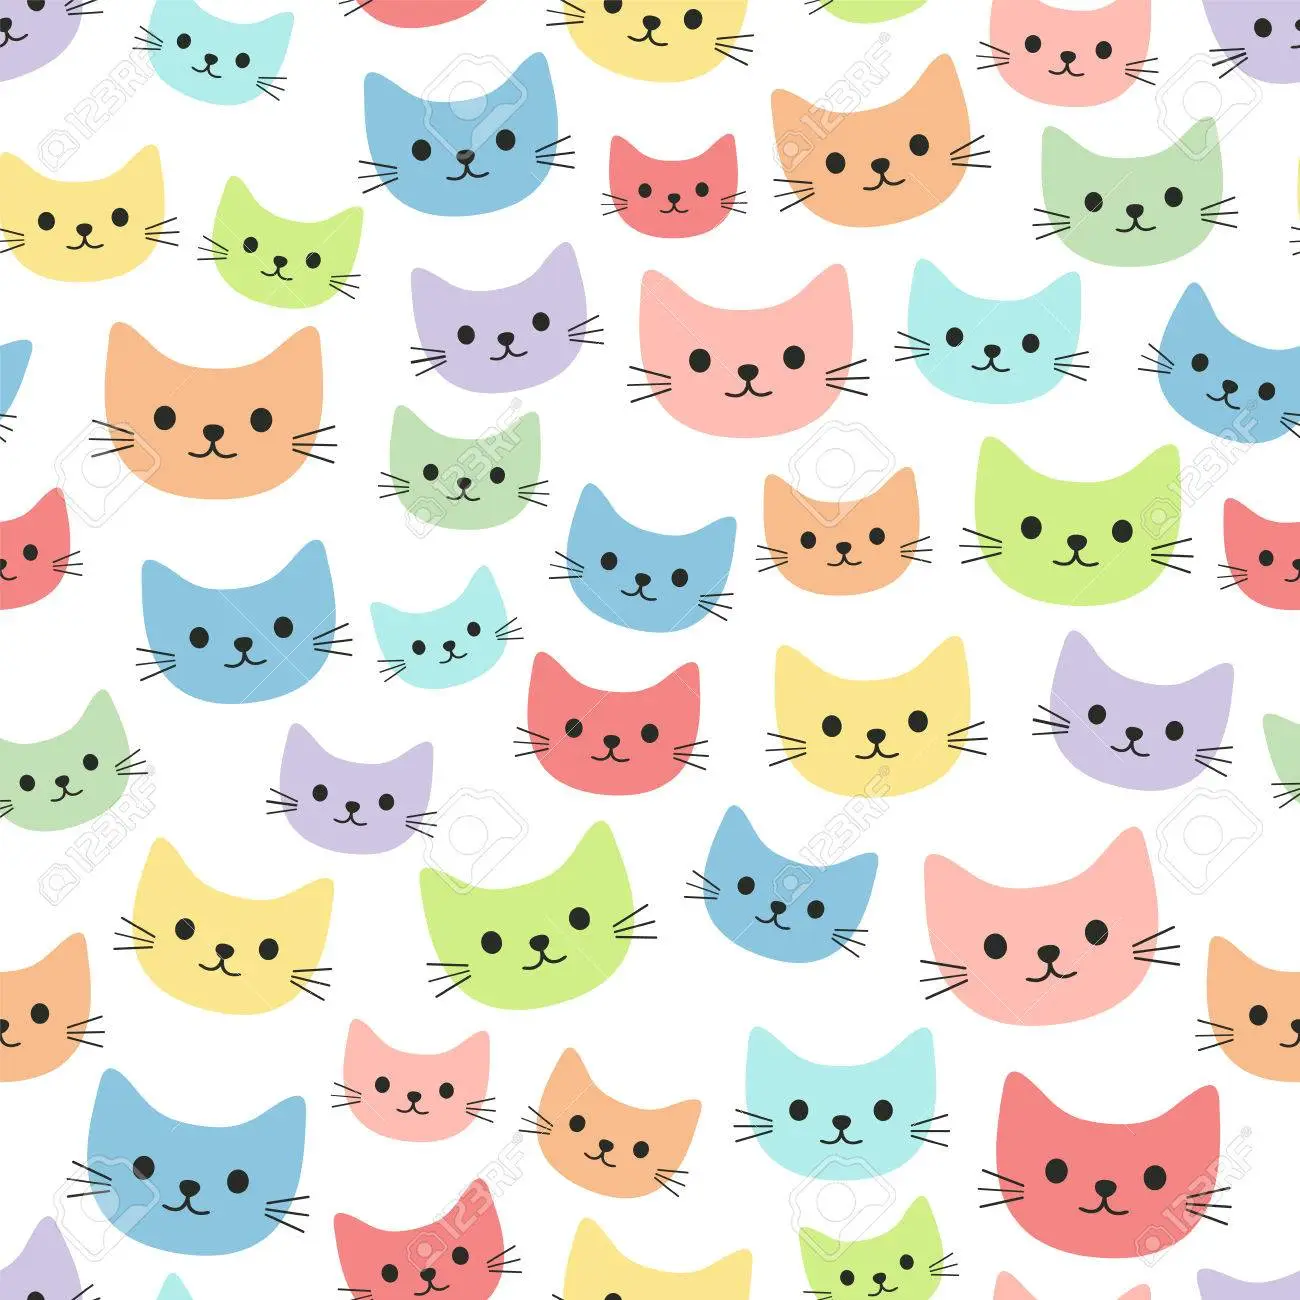 Vector illustration, Cats seamless pattern, Different type of cute